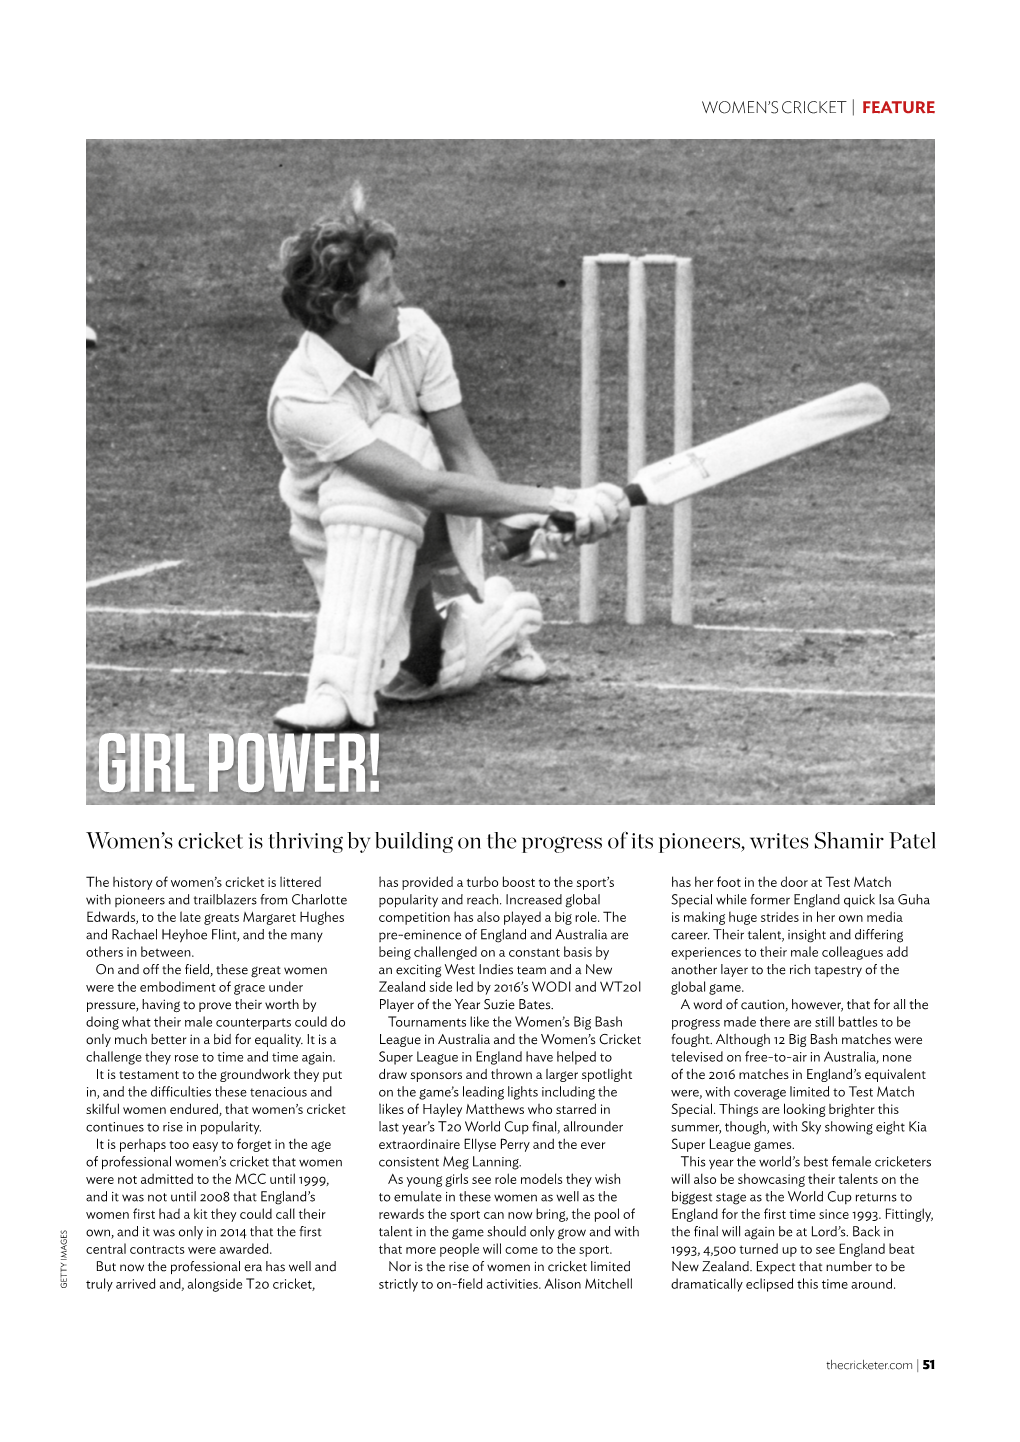 GIRL POWER! Women’S Cricket Is Thriving by Building on the Progress of Its Pioneers, Writes Shamir Patel